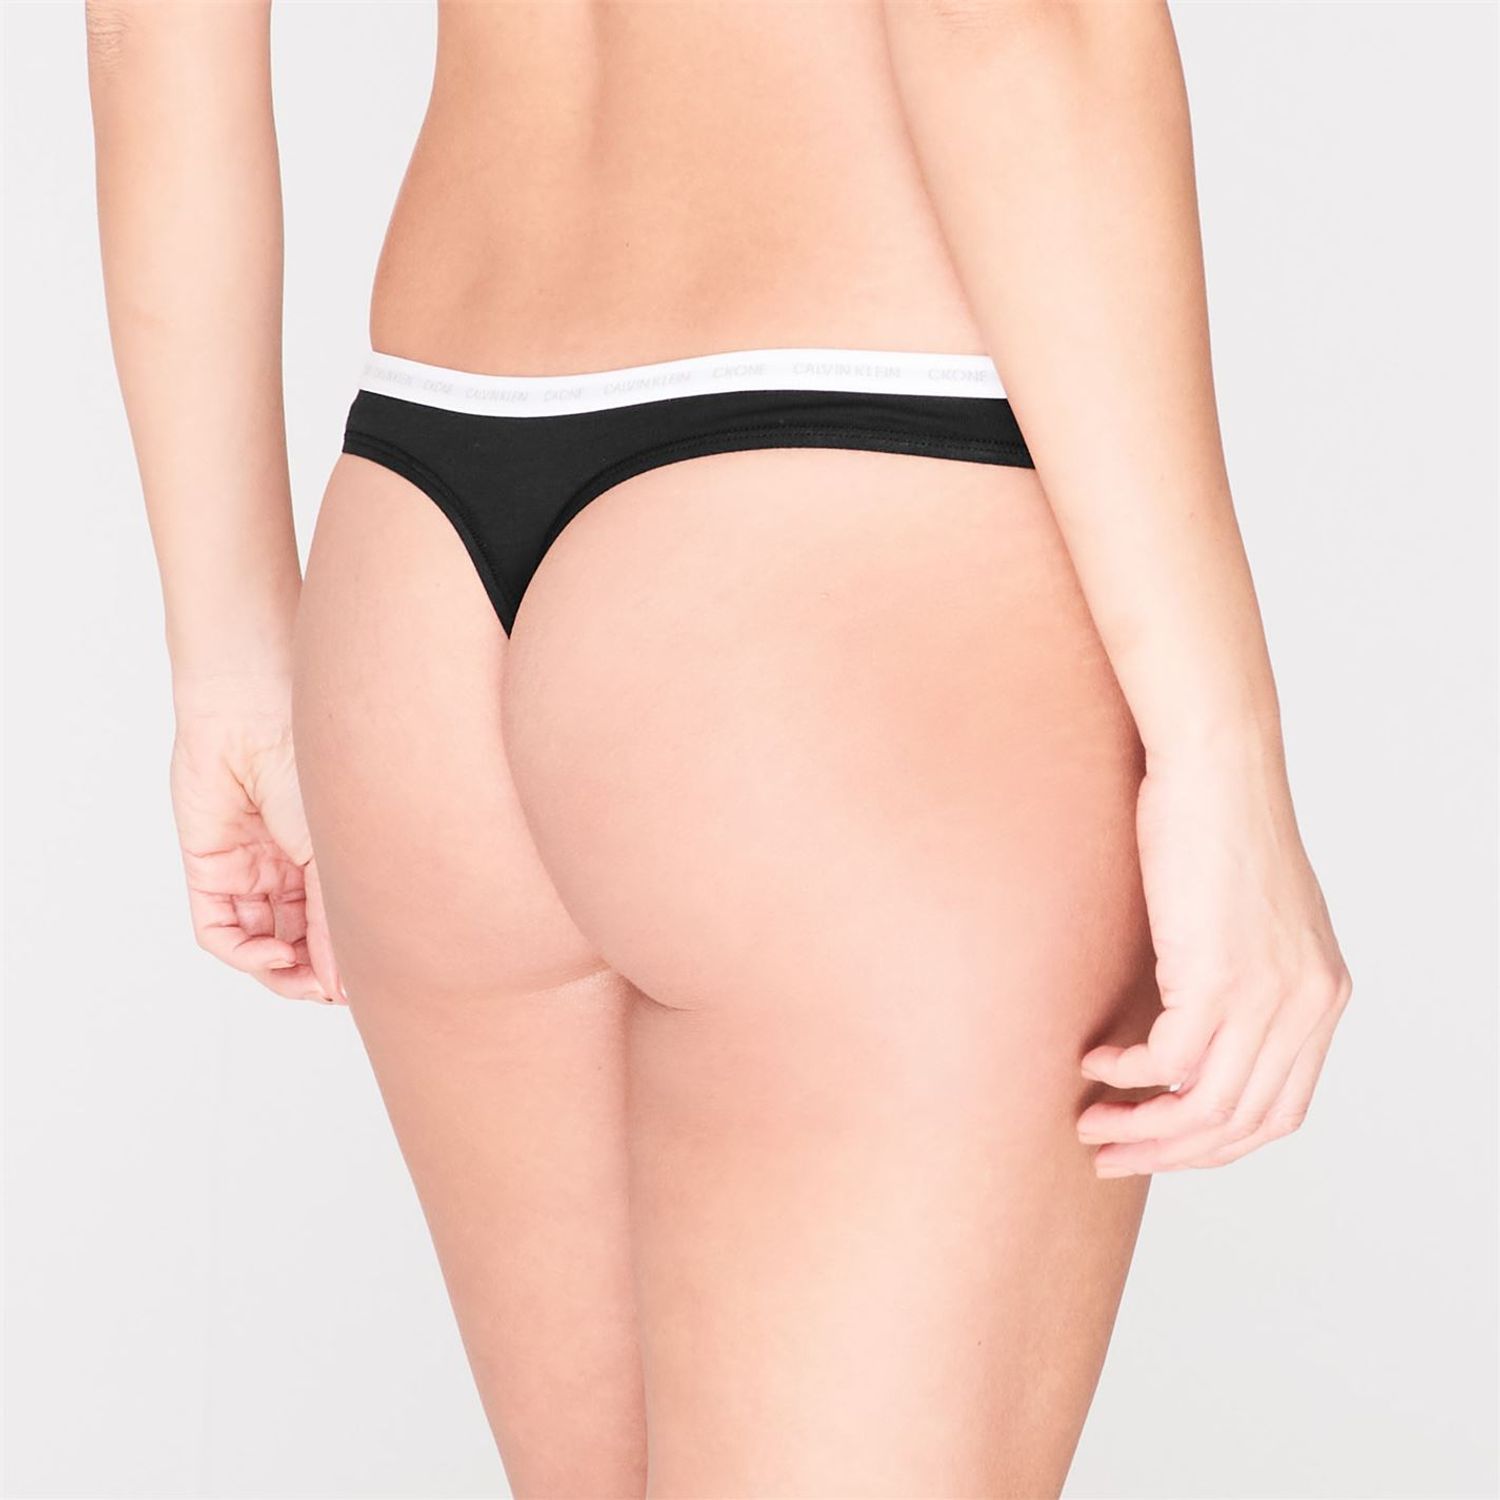 CK One Cotton Thong –